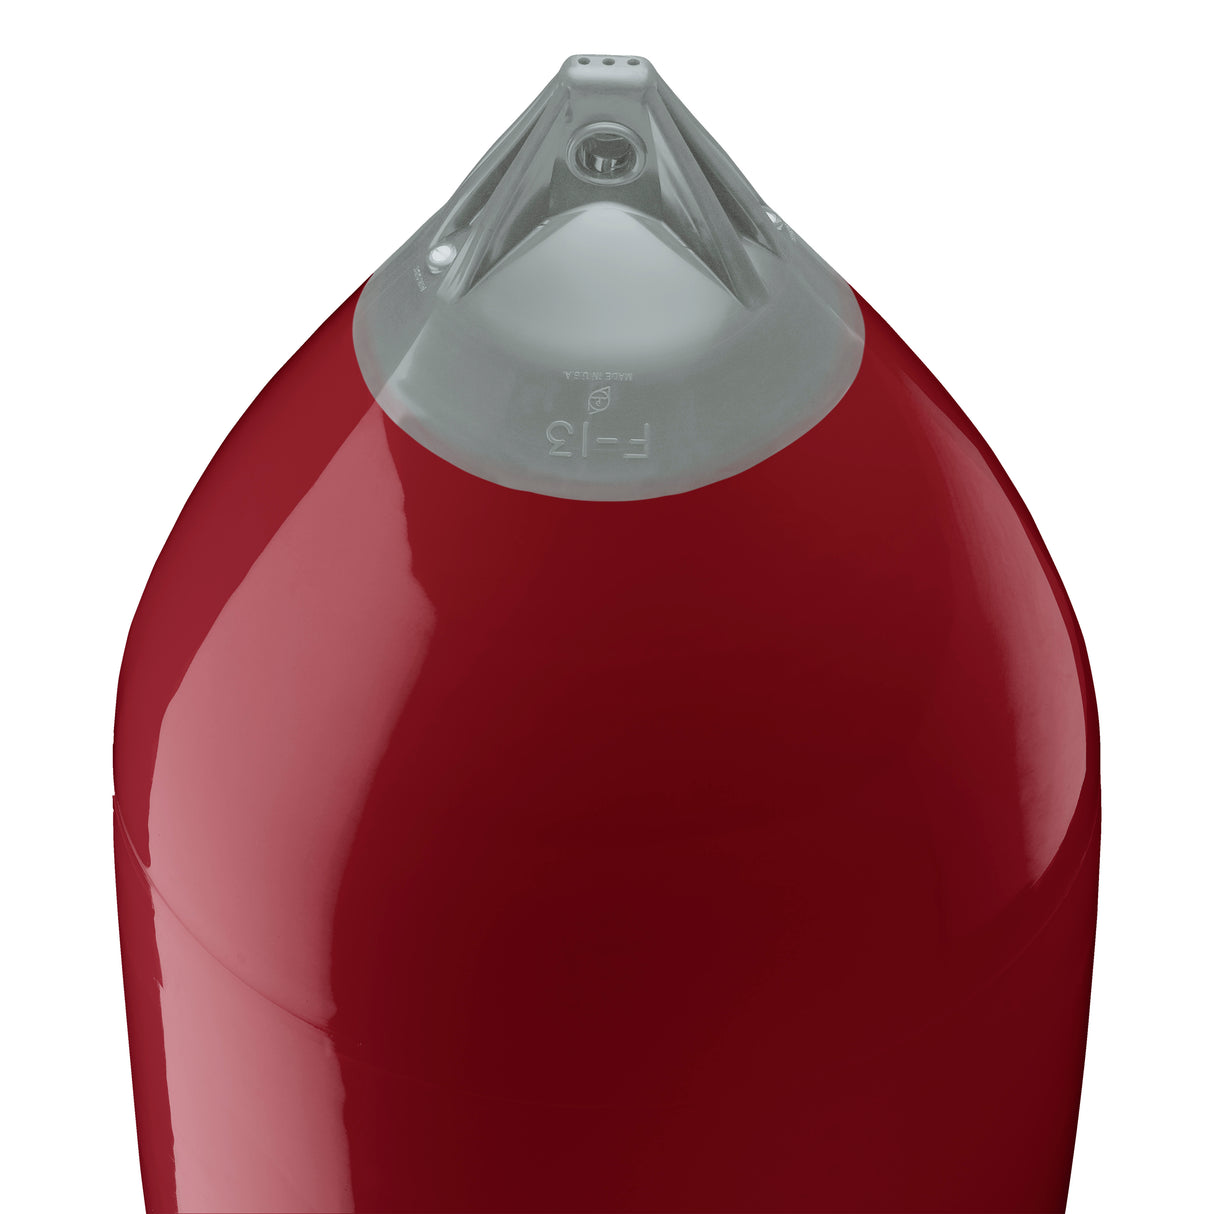 Burgundy boat fender with Grey-Top, Polyform F-13 angled shot